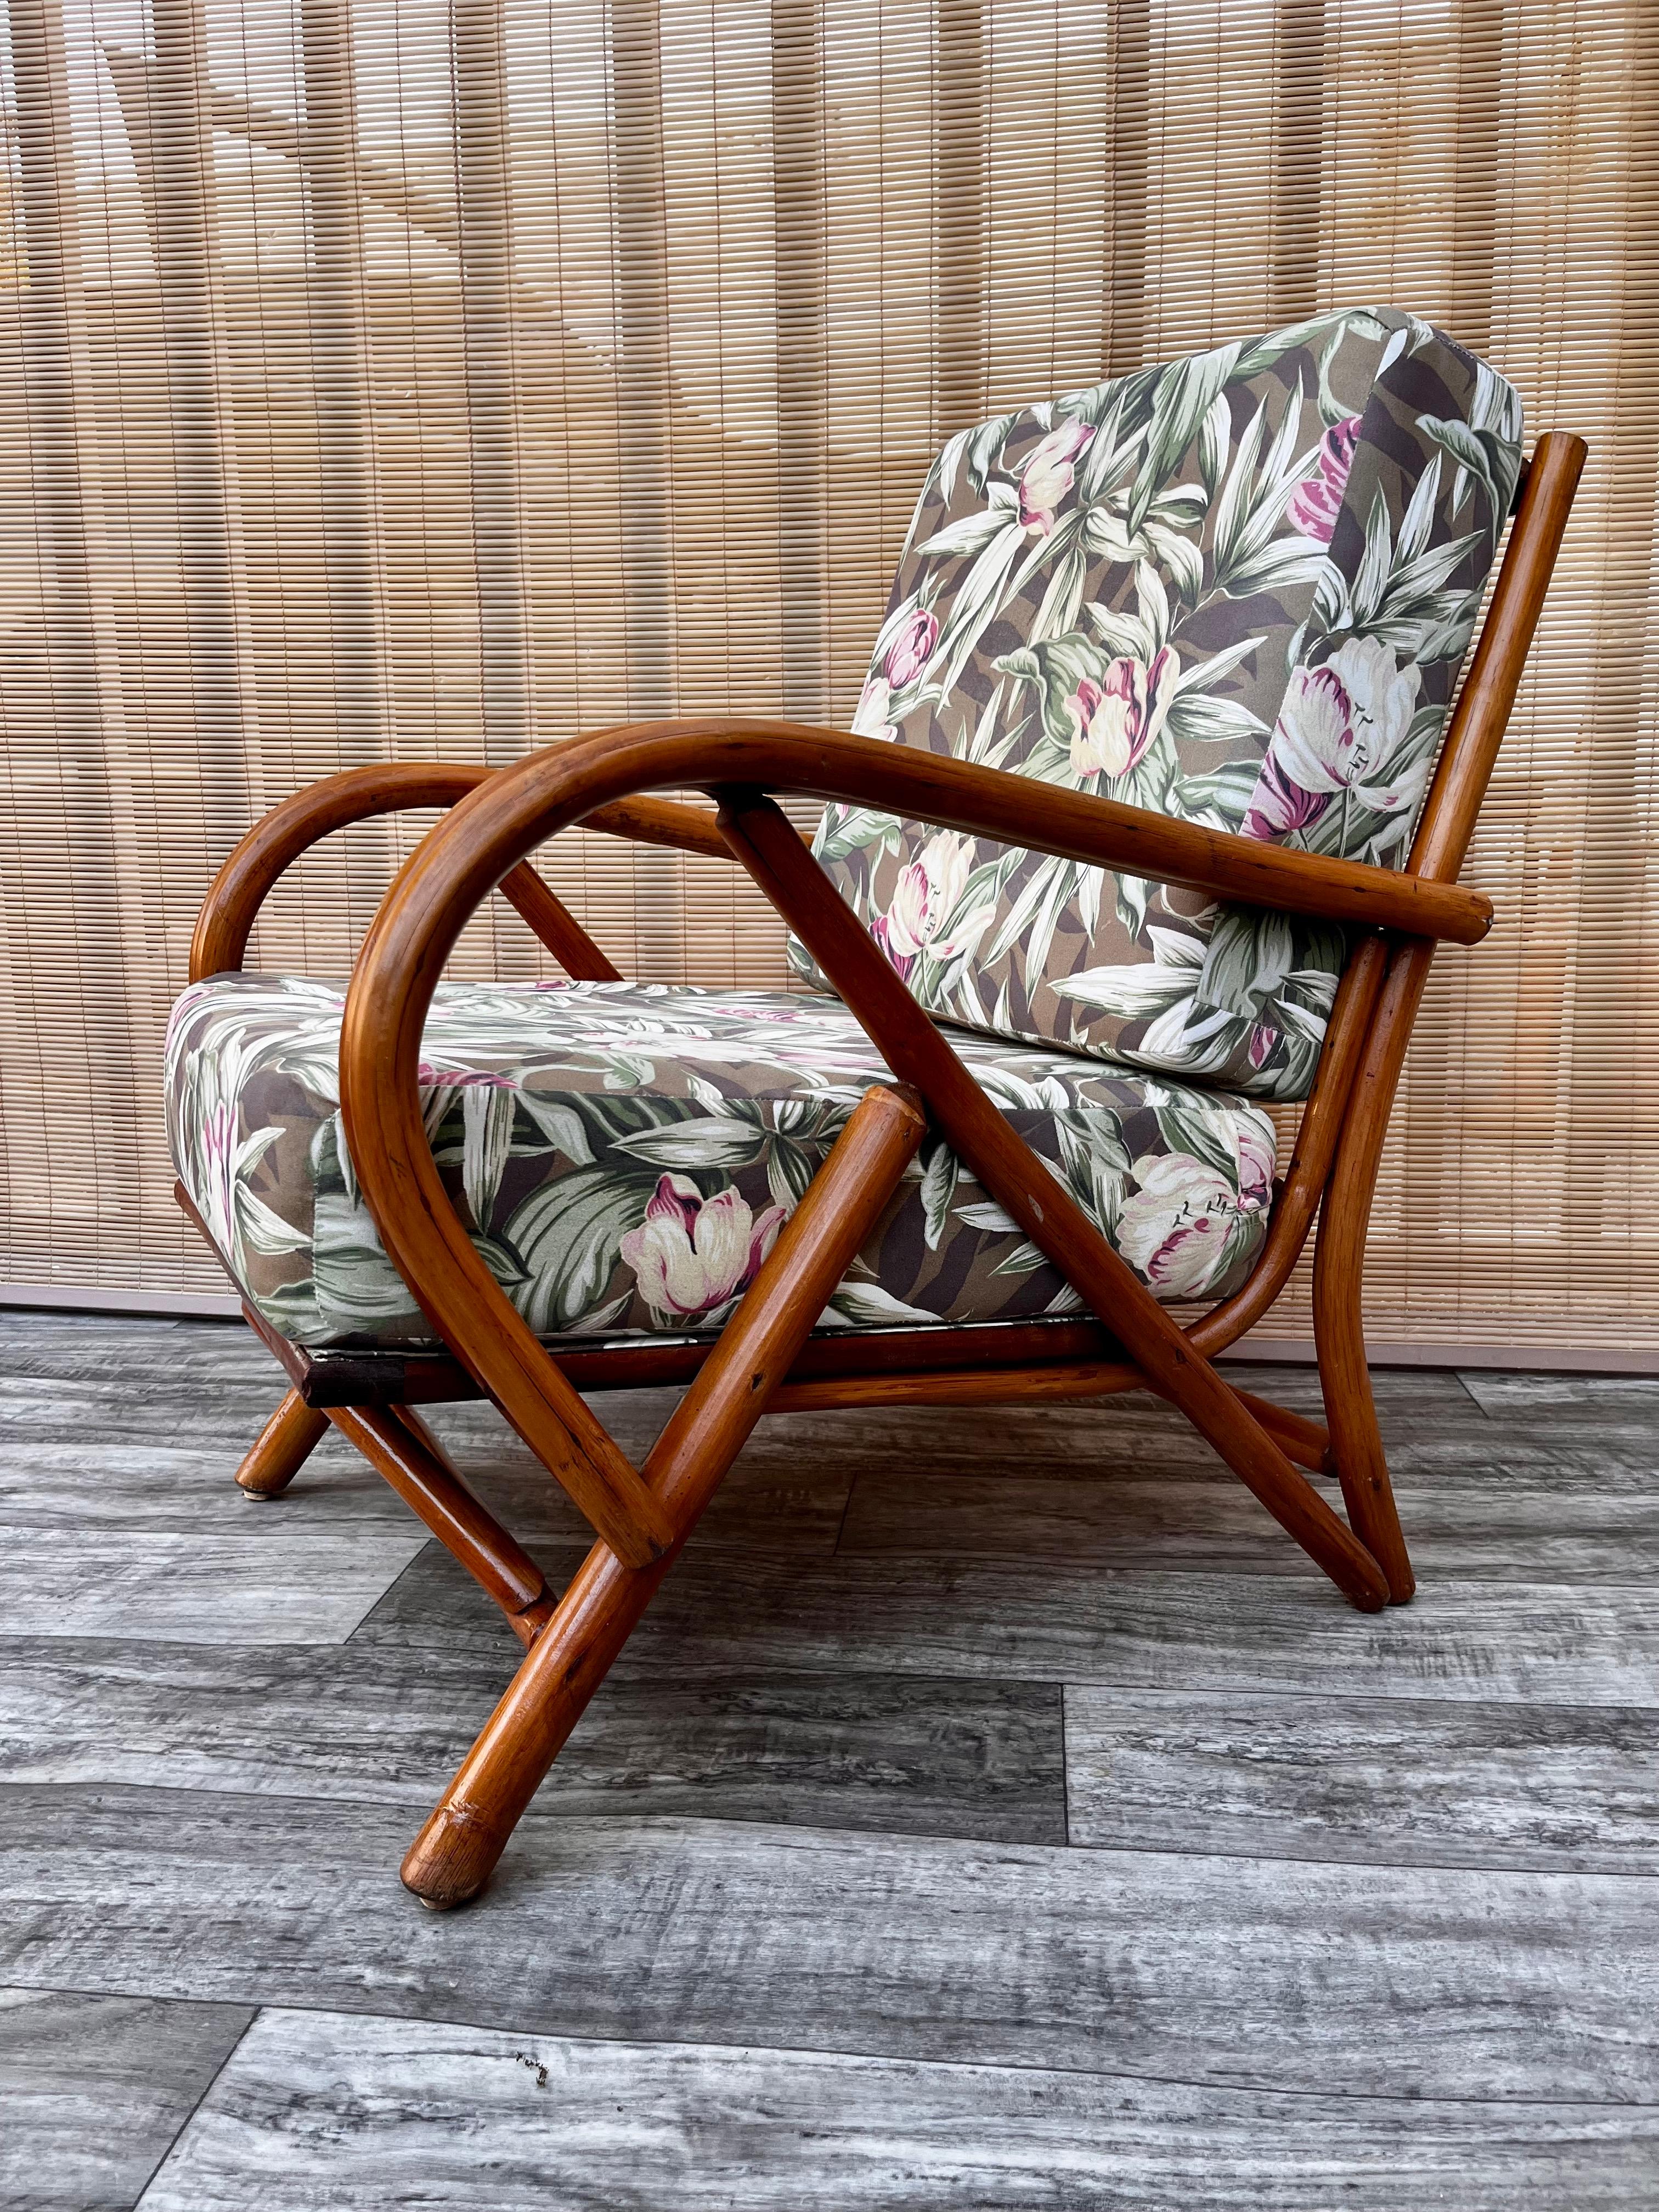 American Vintage Mid-Century Modern Rattan Lounge Chair, circa 1960s For Sale